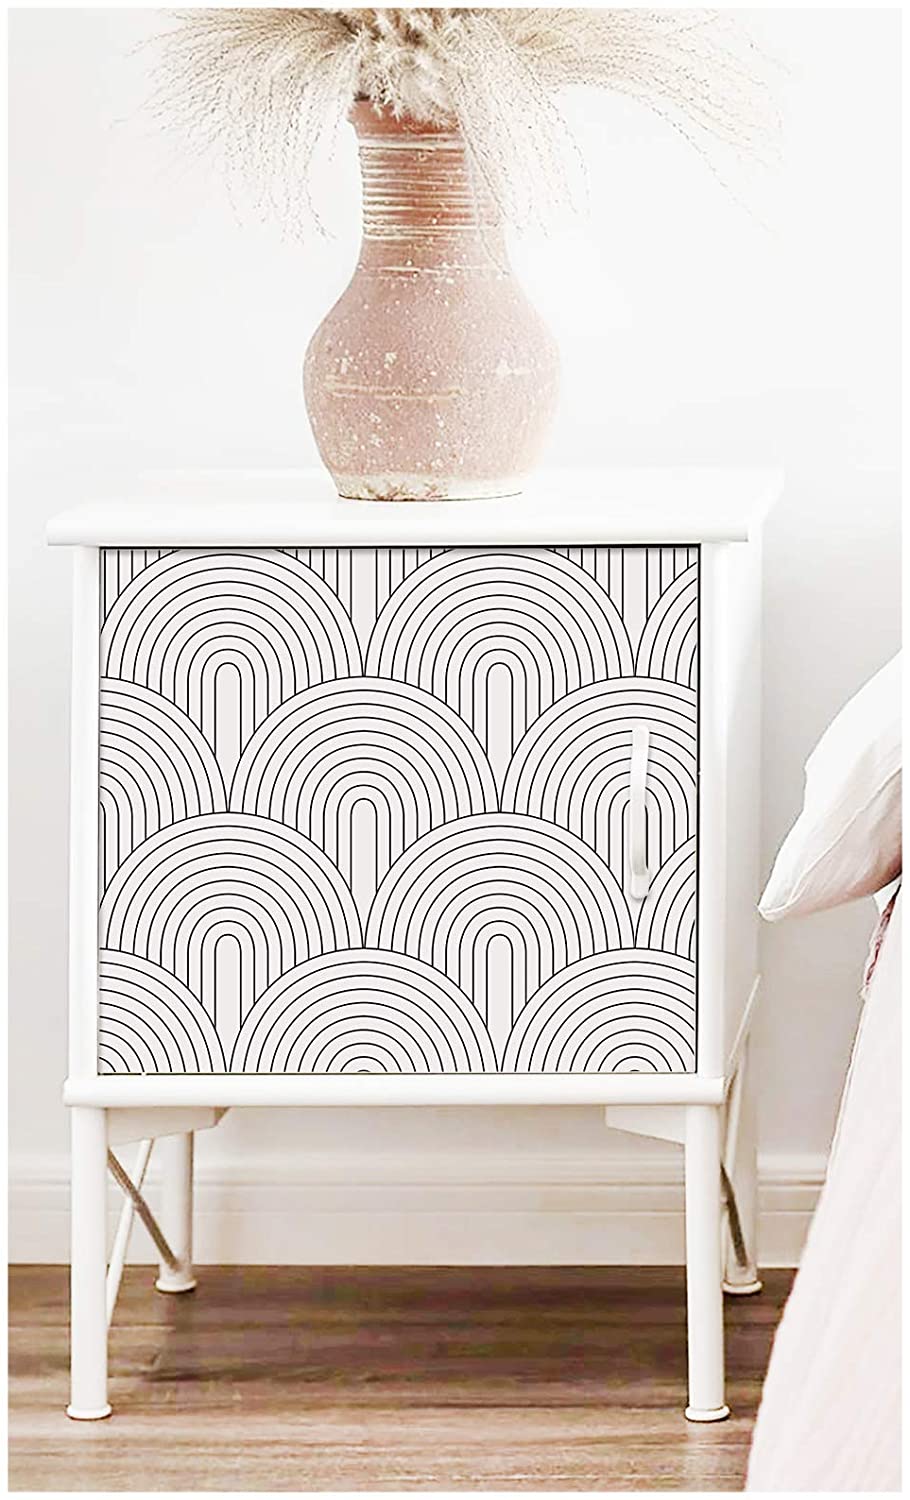 Enhance the look of the nightstand by adding a cute wallpaper to the front